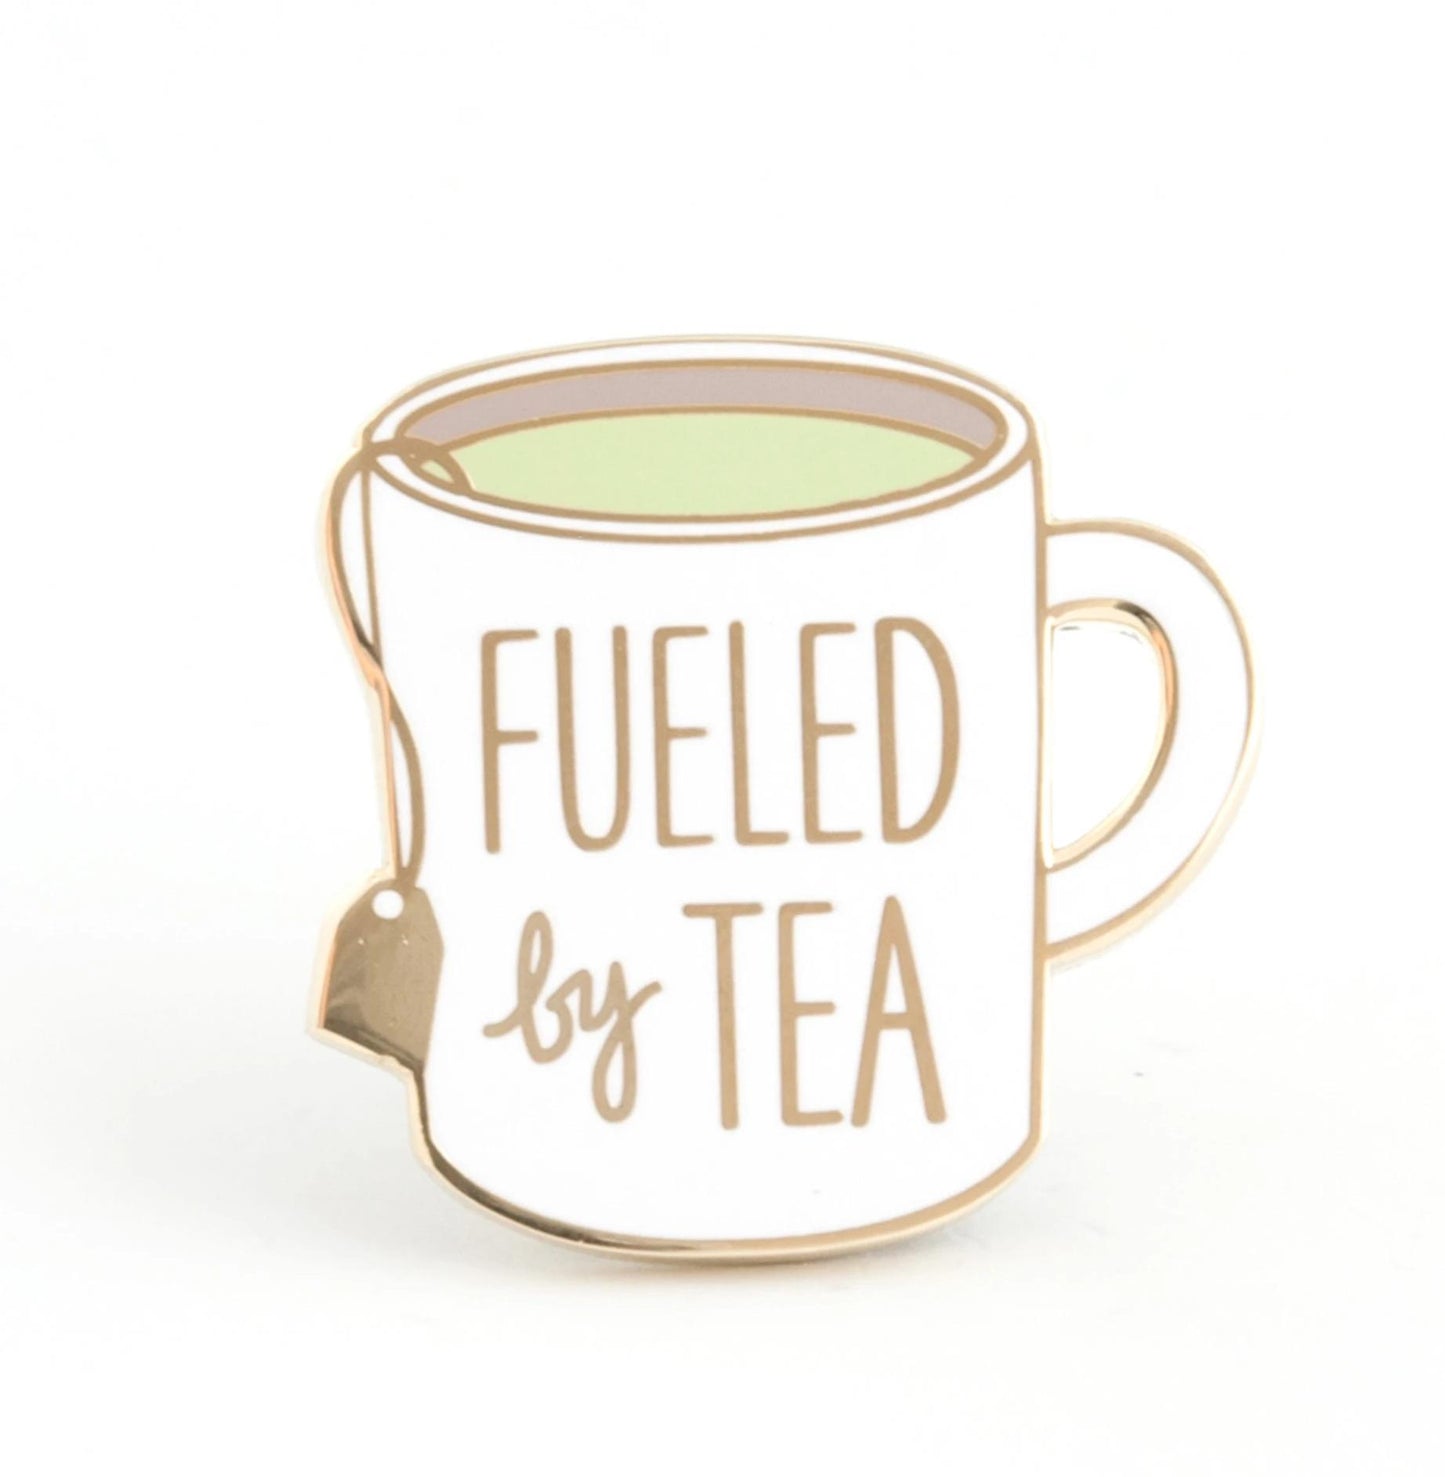 fueled by tea enamel pin - the salty hive